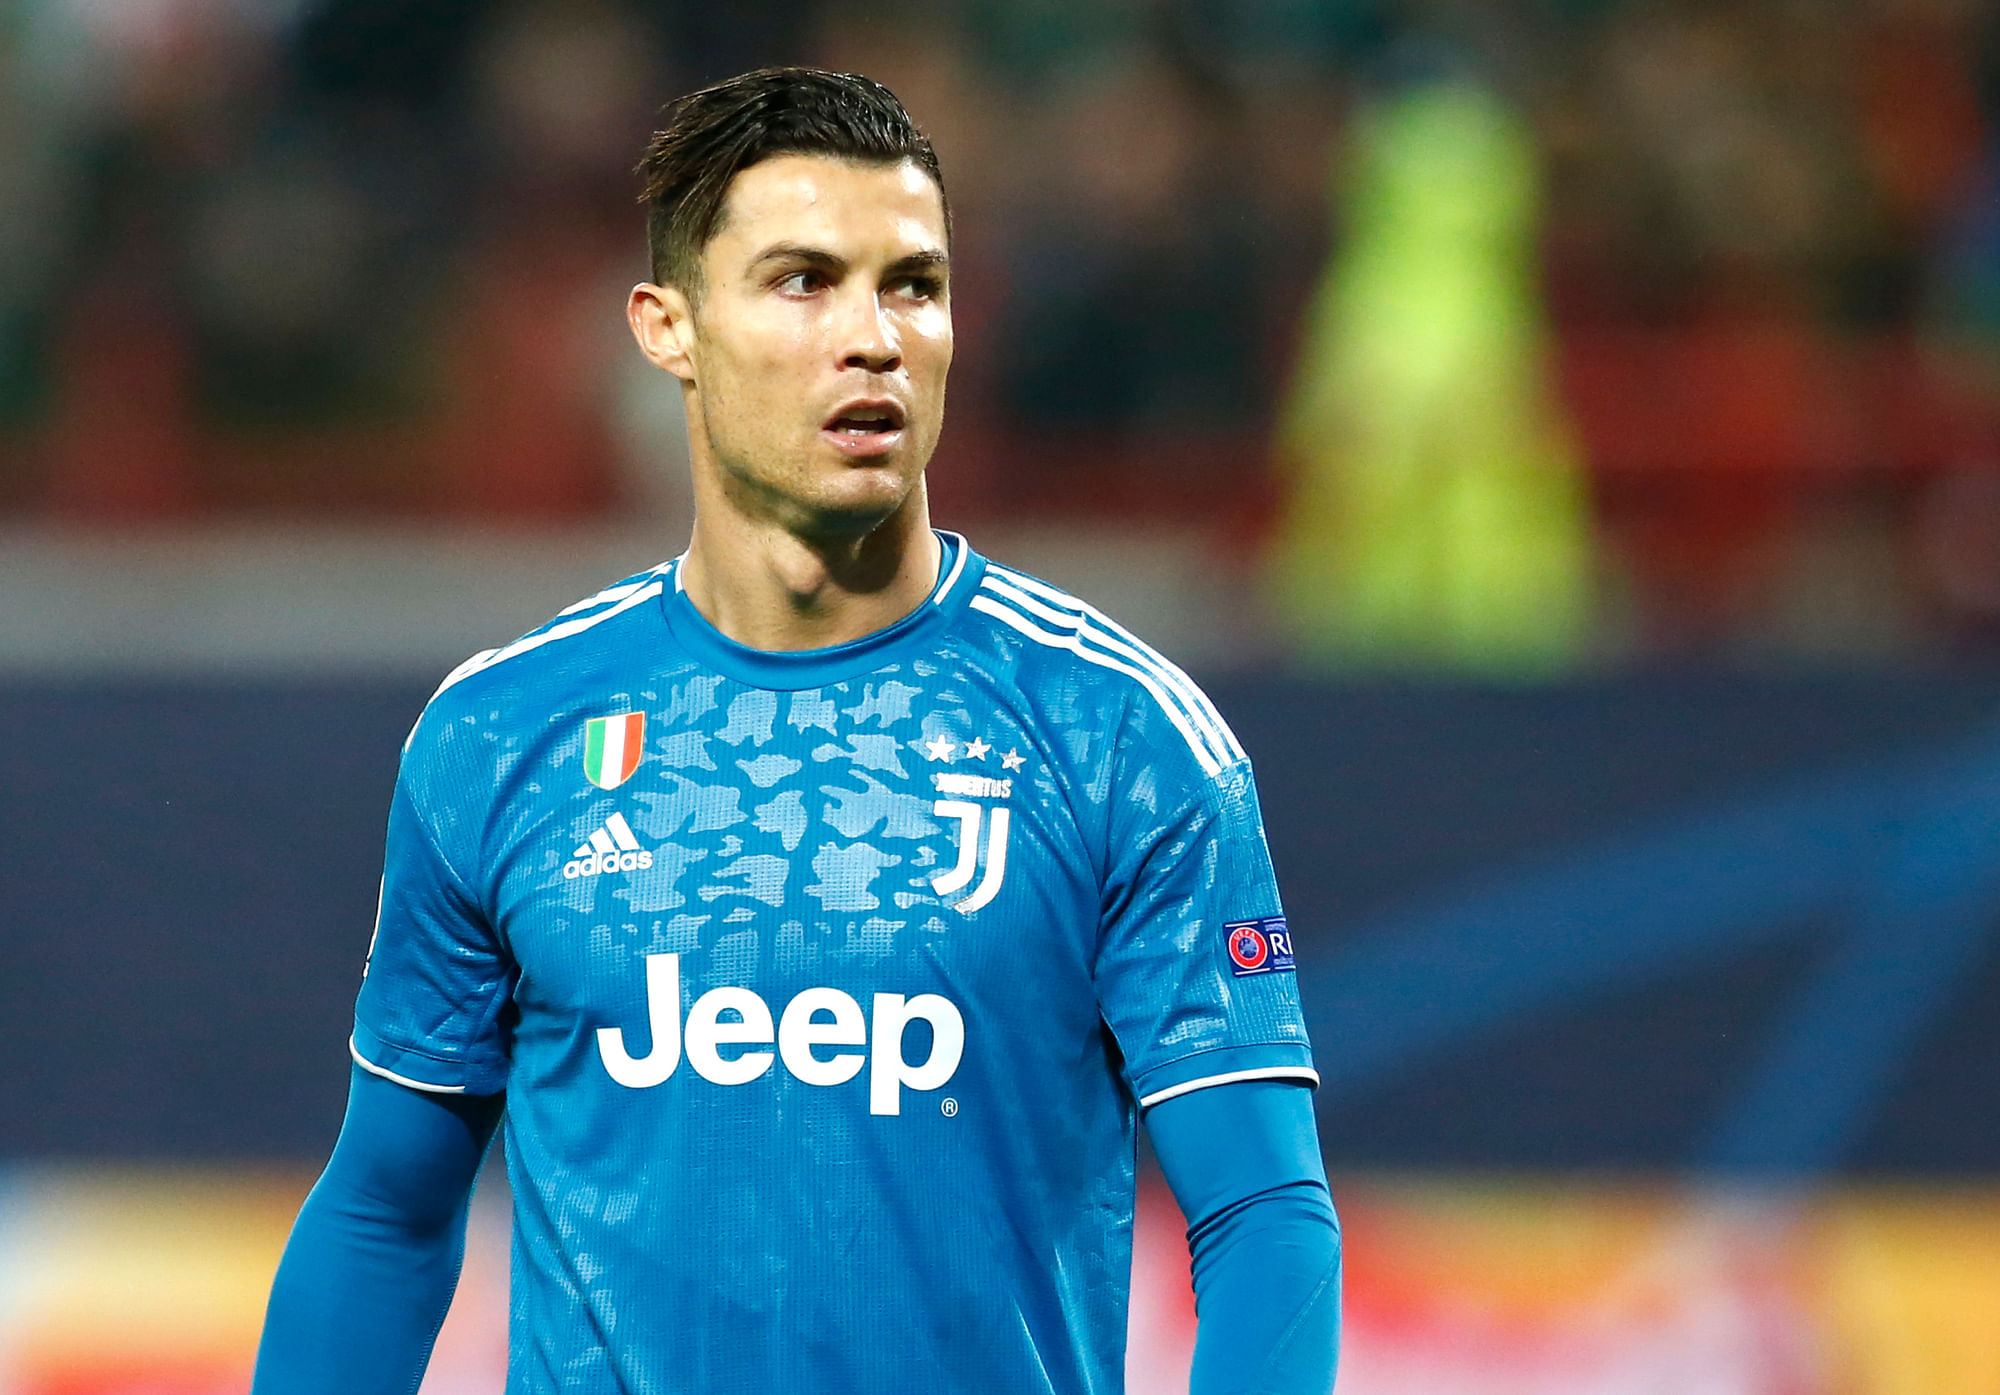 Juventus’ Cristiano Ronaldo during the Champions League Group D soccer match between Lokomotiv Moscow and Juventus at the Lokomotiv Stadium in Moscow, Russia.